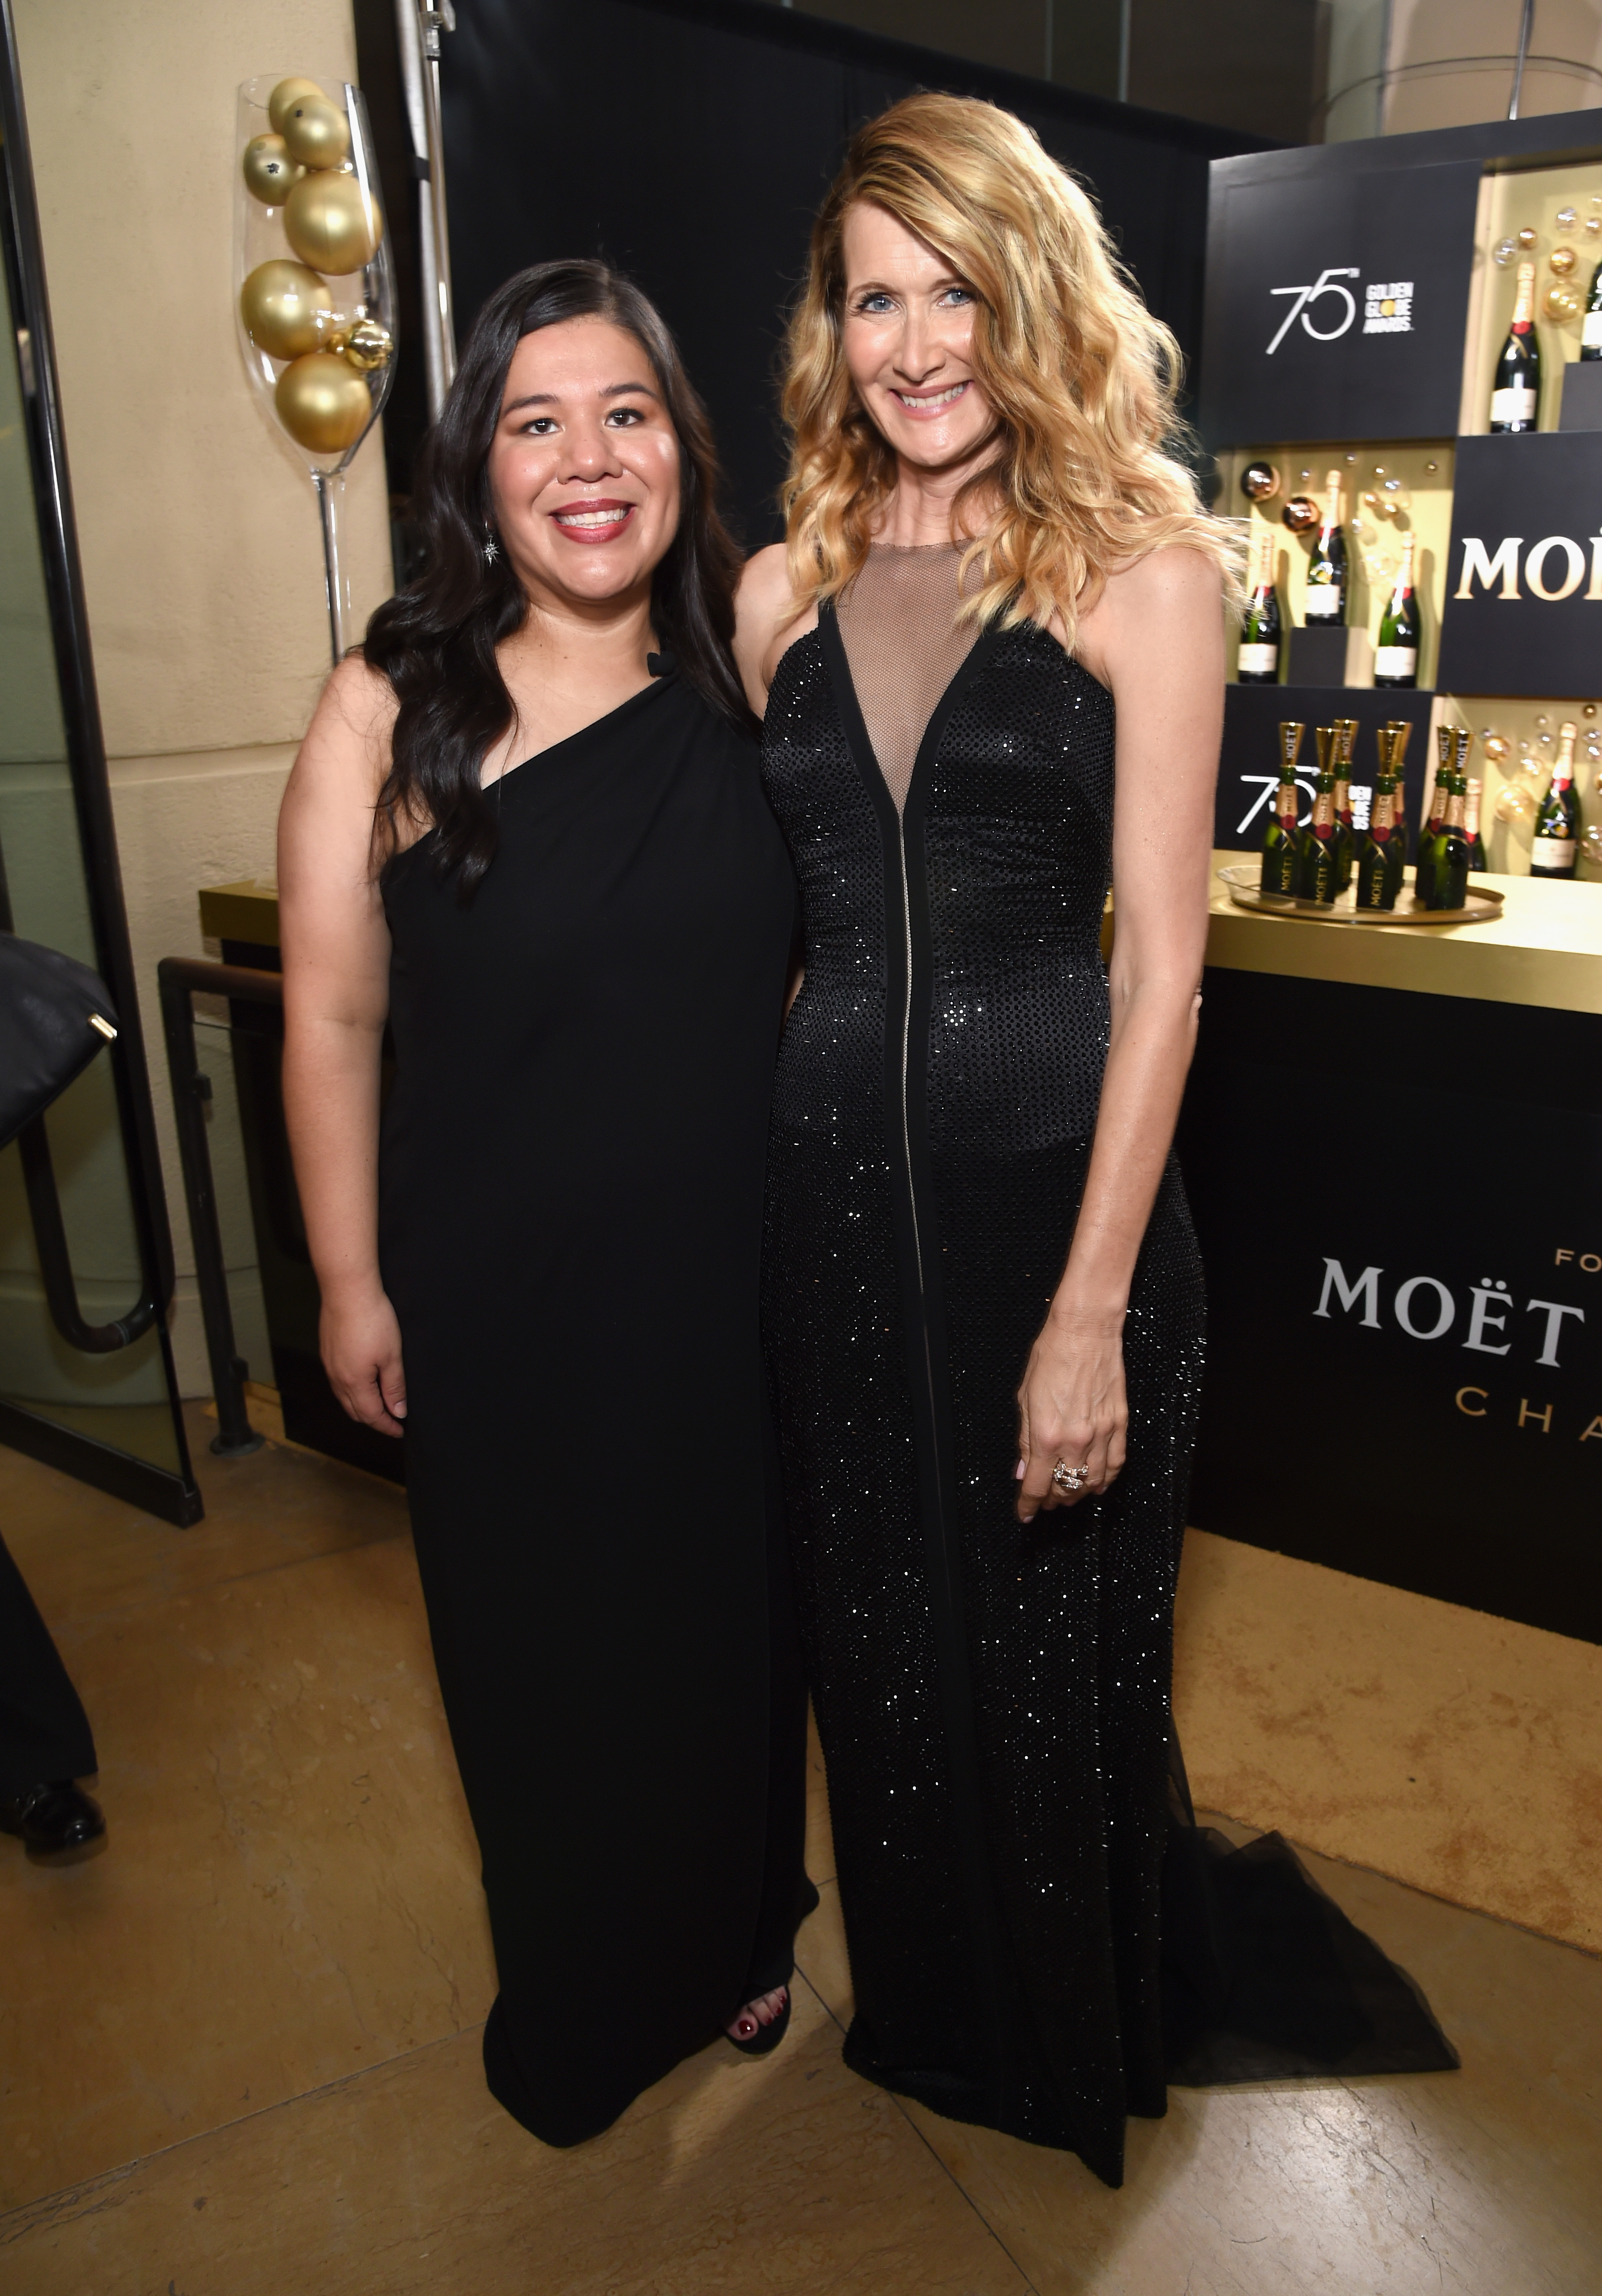 Activist Monica Ramirez and actor Laura Dern celebrate The 75th Annual Golden Globe Awards with Moet &amp; Chandon at The Beverly Hilton Hotel on January 7, 2018 in Beverly Hills, California. (Michael Kovac—Getty Images)